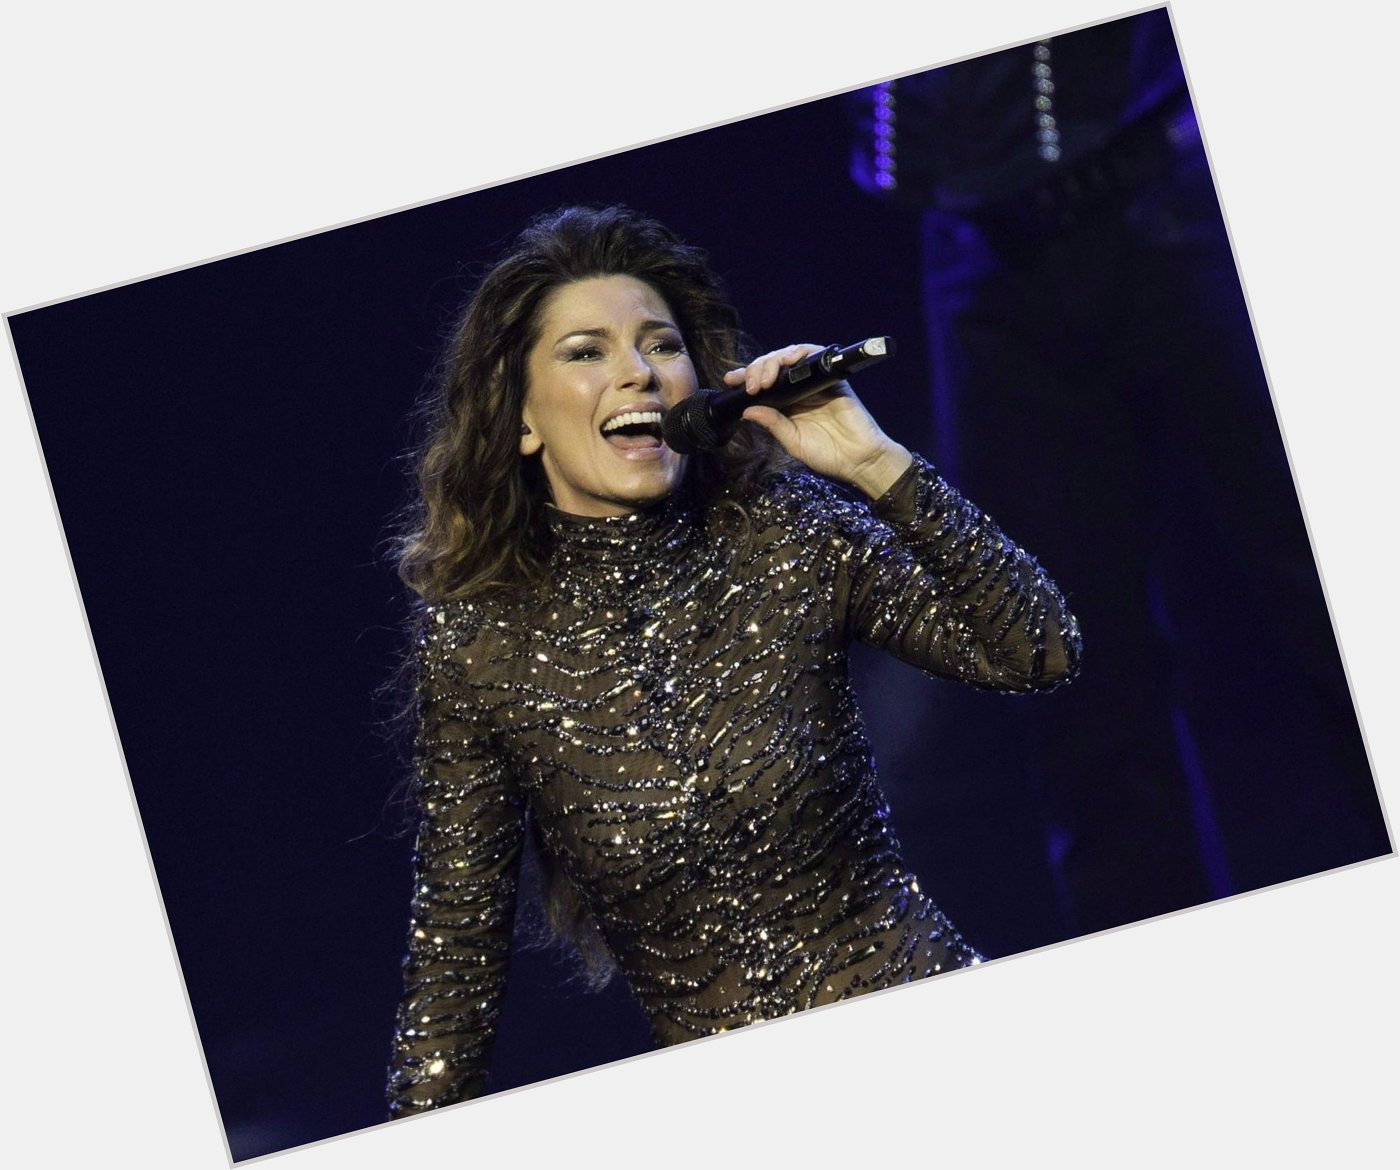 August 28, 2020
Happy birthday to Canadian singer Shania Twain 55 years old. 